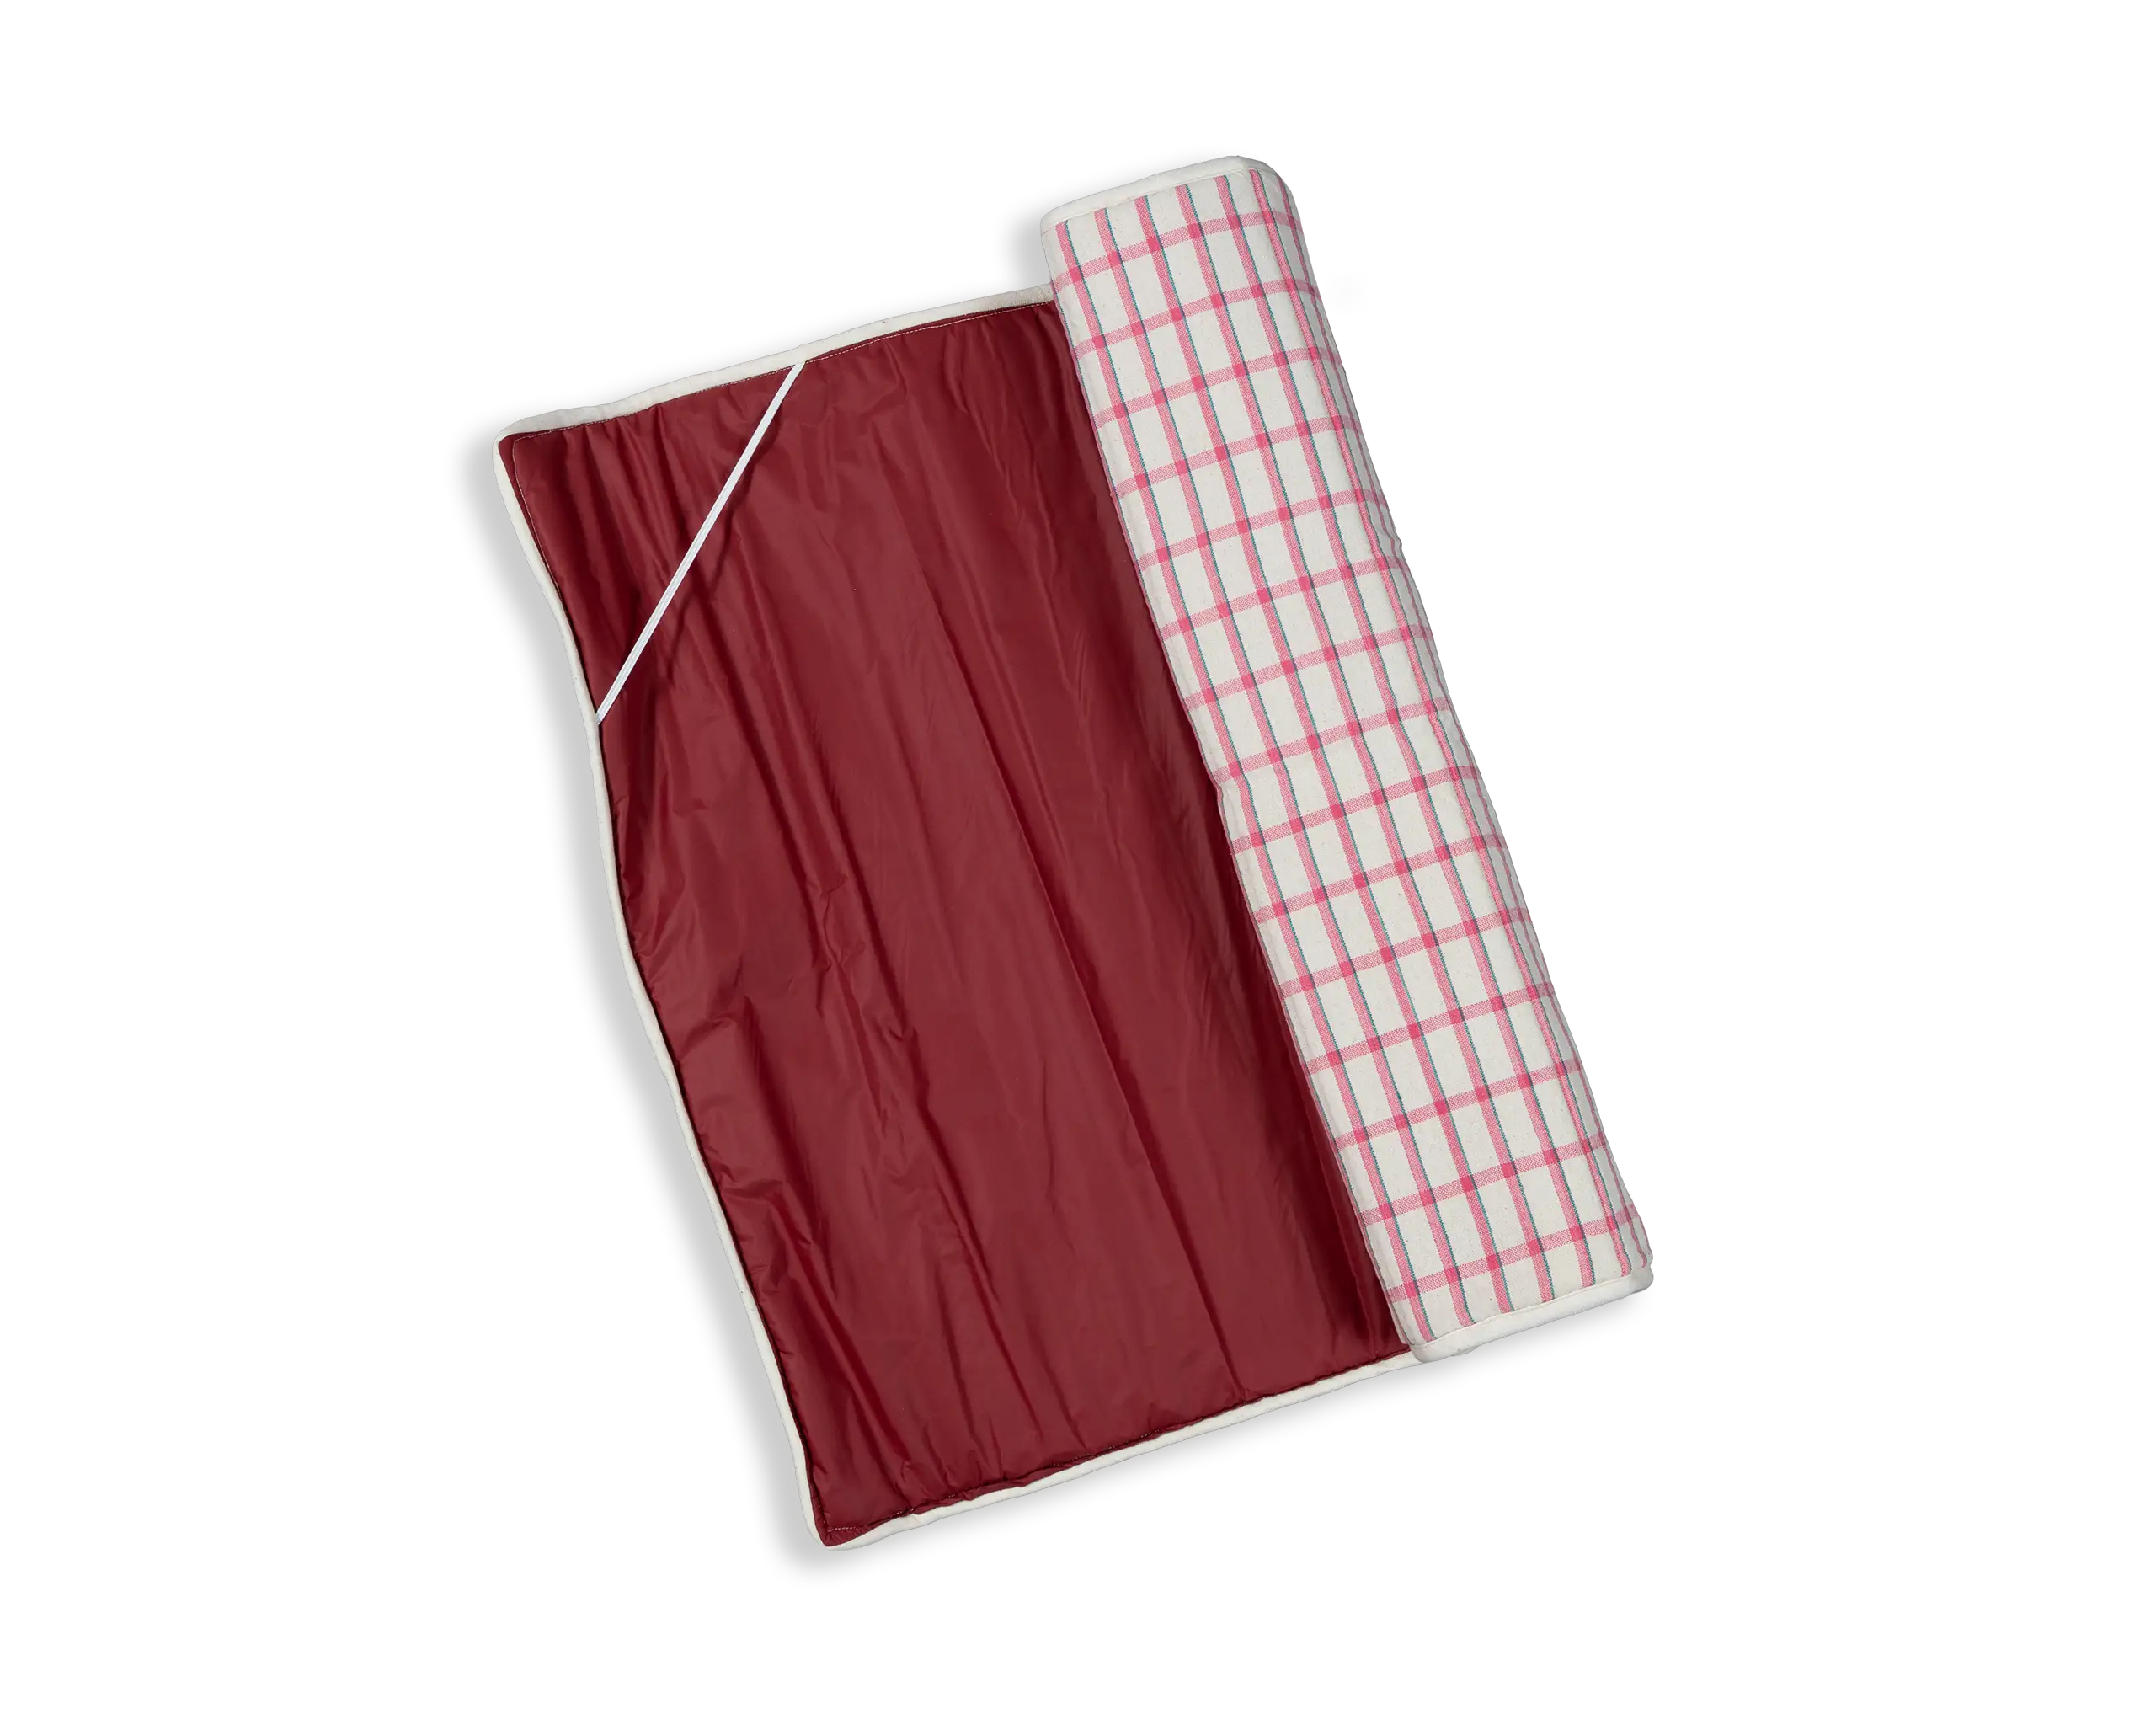 Our Changing Mats are lightweight and foldable. It can be used in any situation and any place. It is waterproof under-pads will provide excellent protection against fluids, urine, perspiration, allergens, dust mites, and bacteria. 100% waterproof, yet breathable, comfortable. 